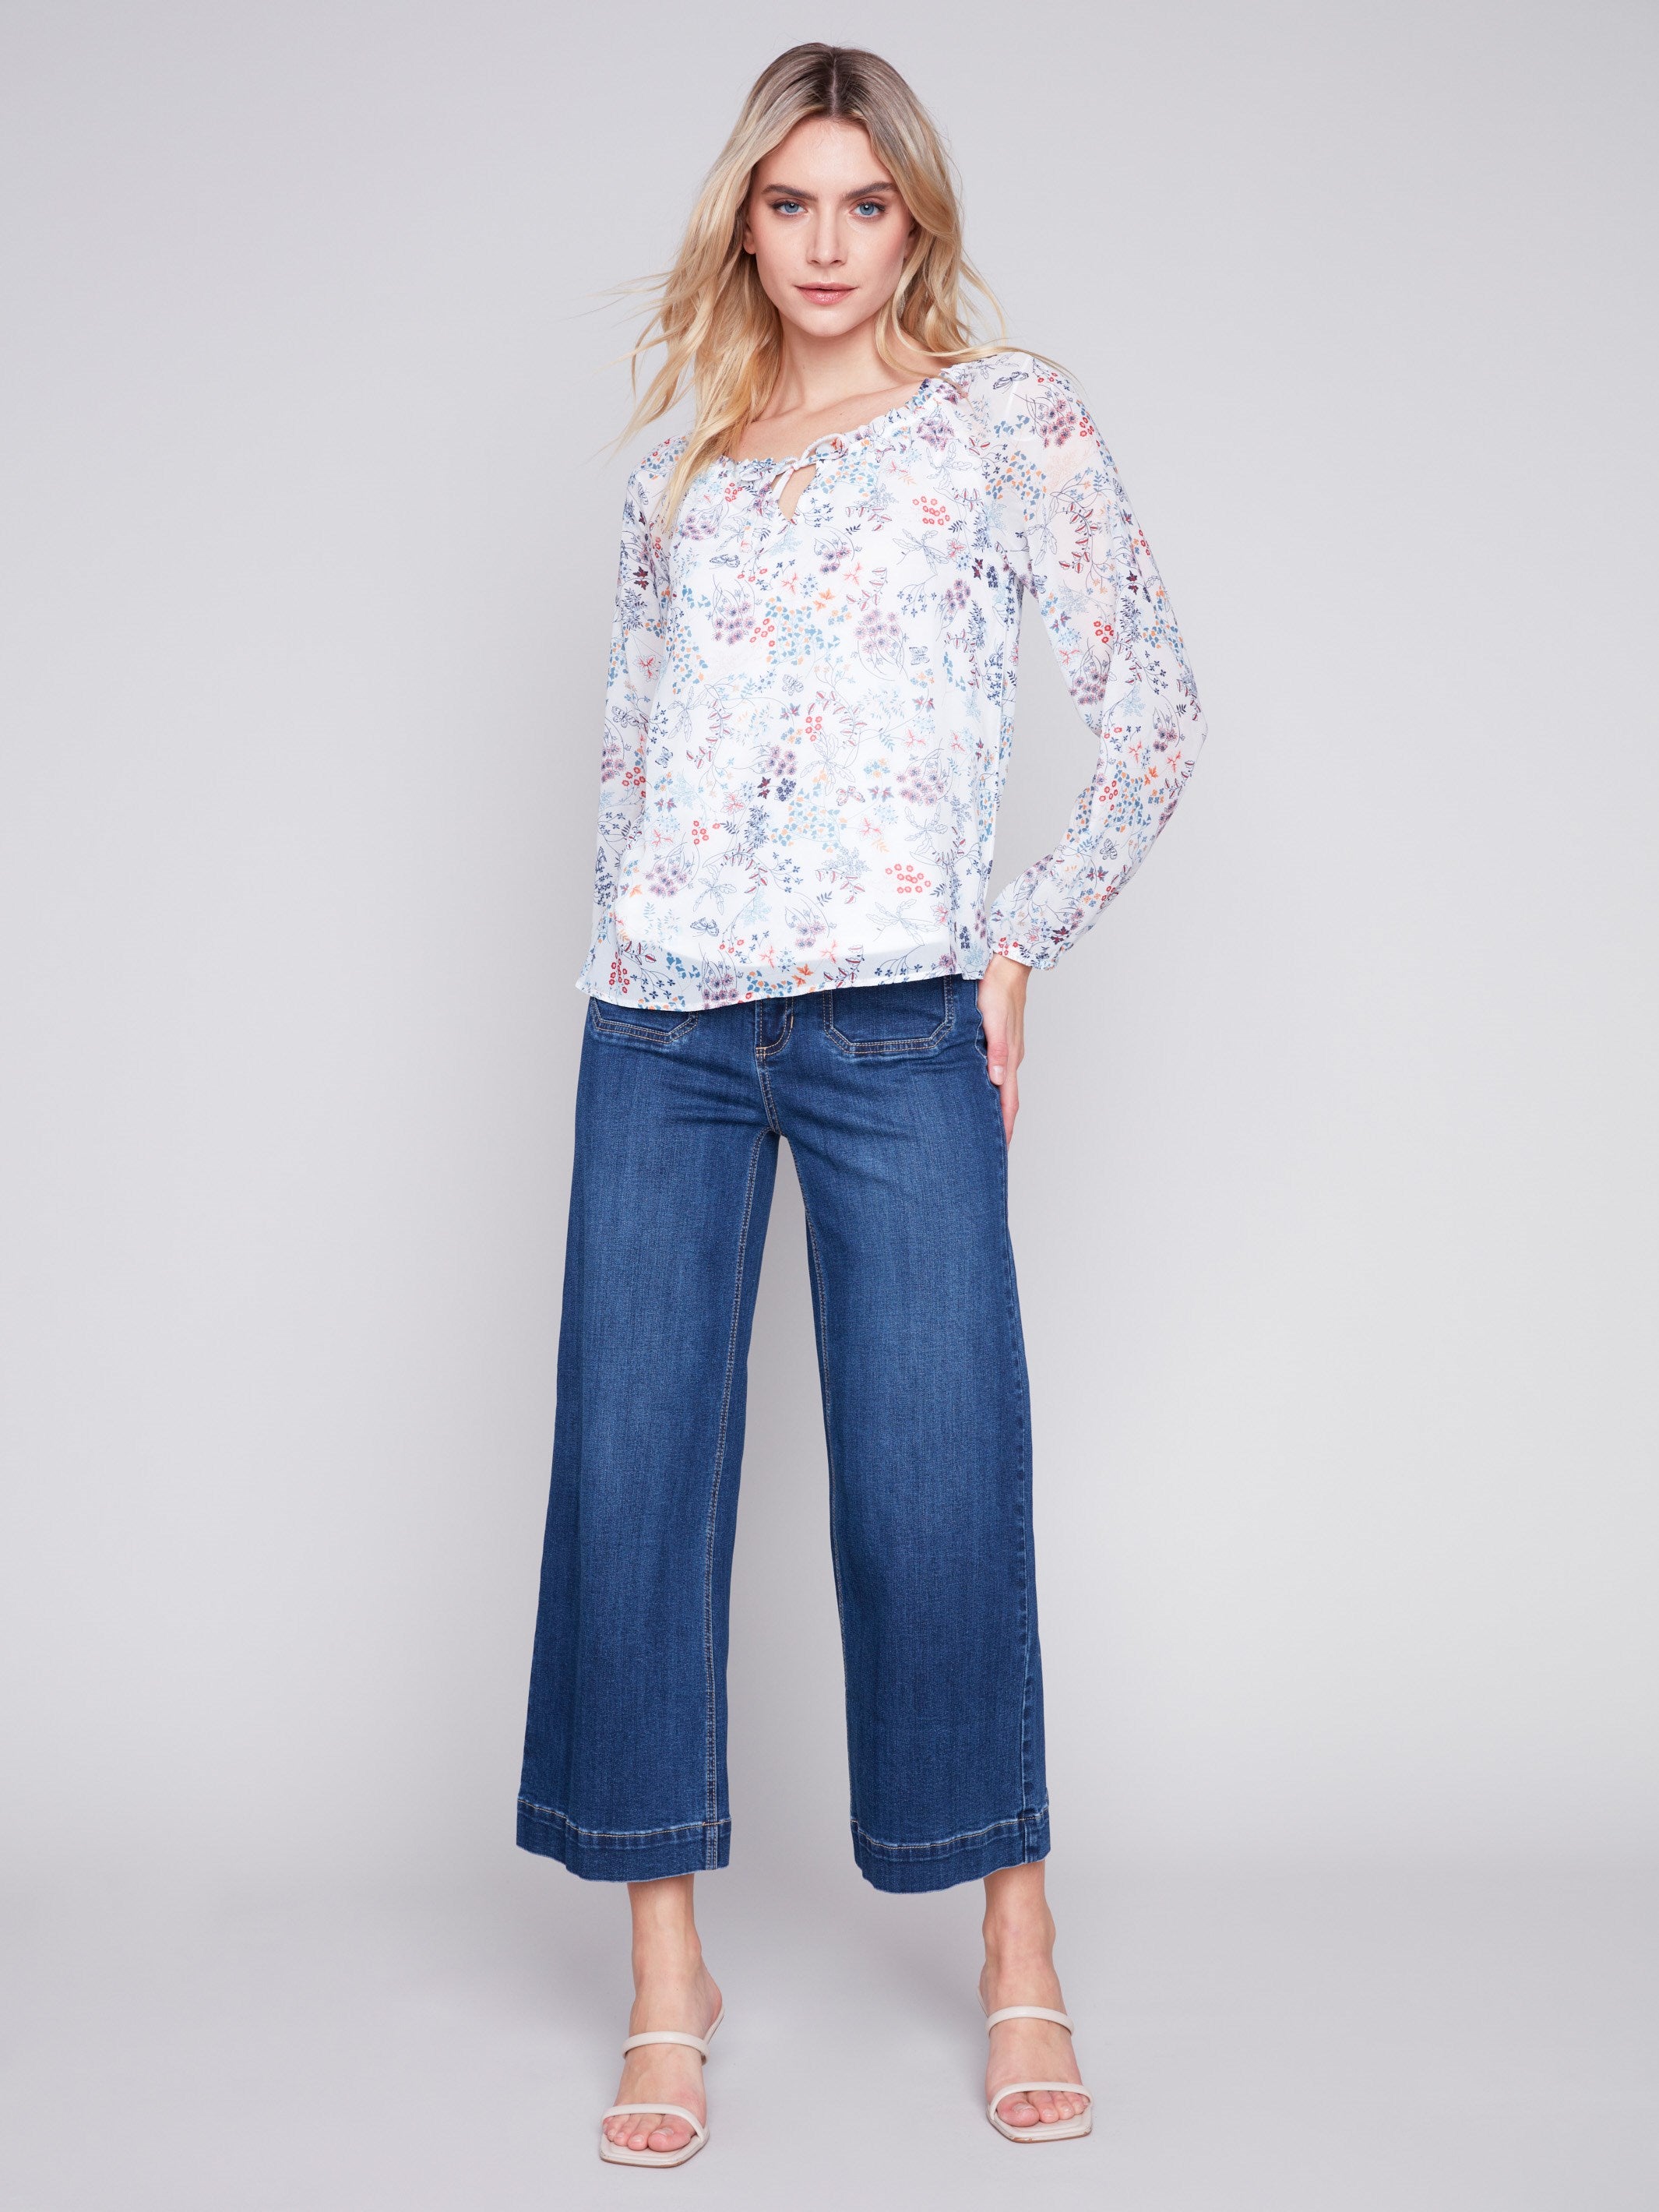 Printed Chiffon Blouse - Blossom - Charlie B Collection Canada - Image 4